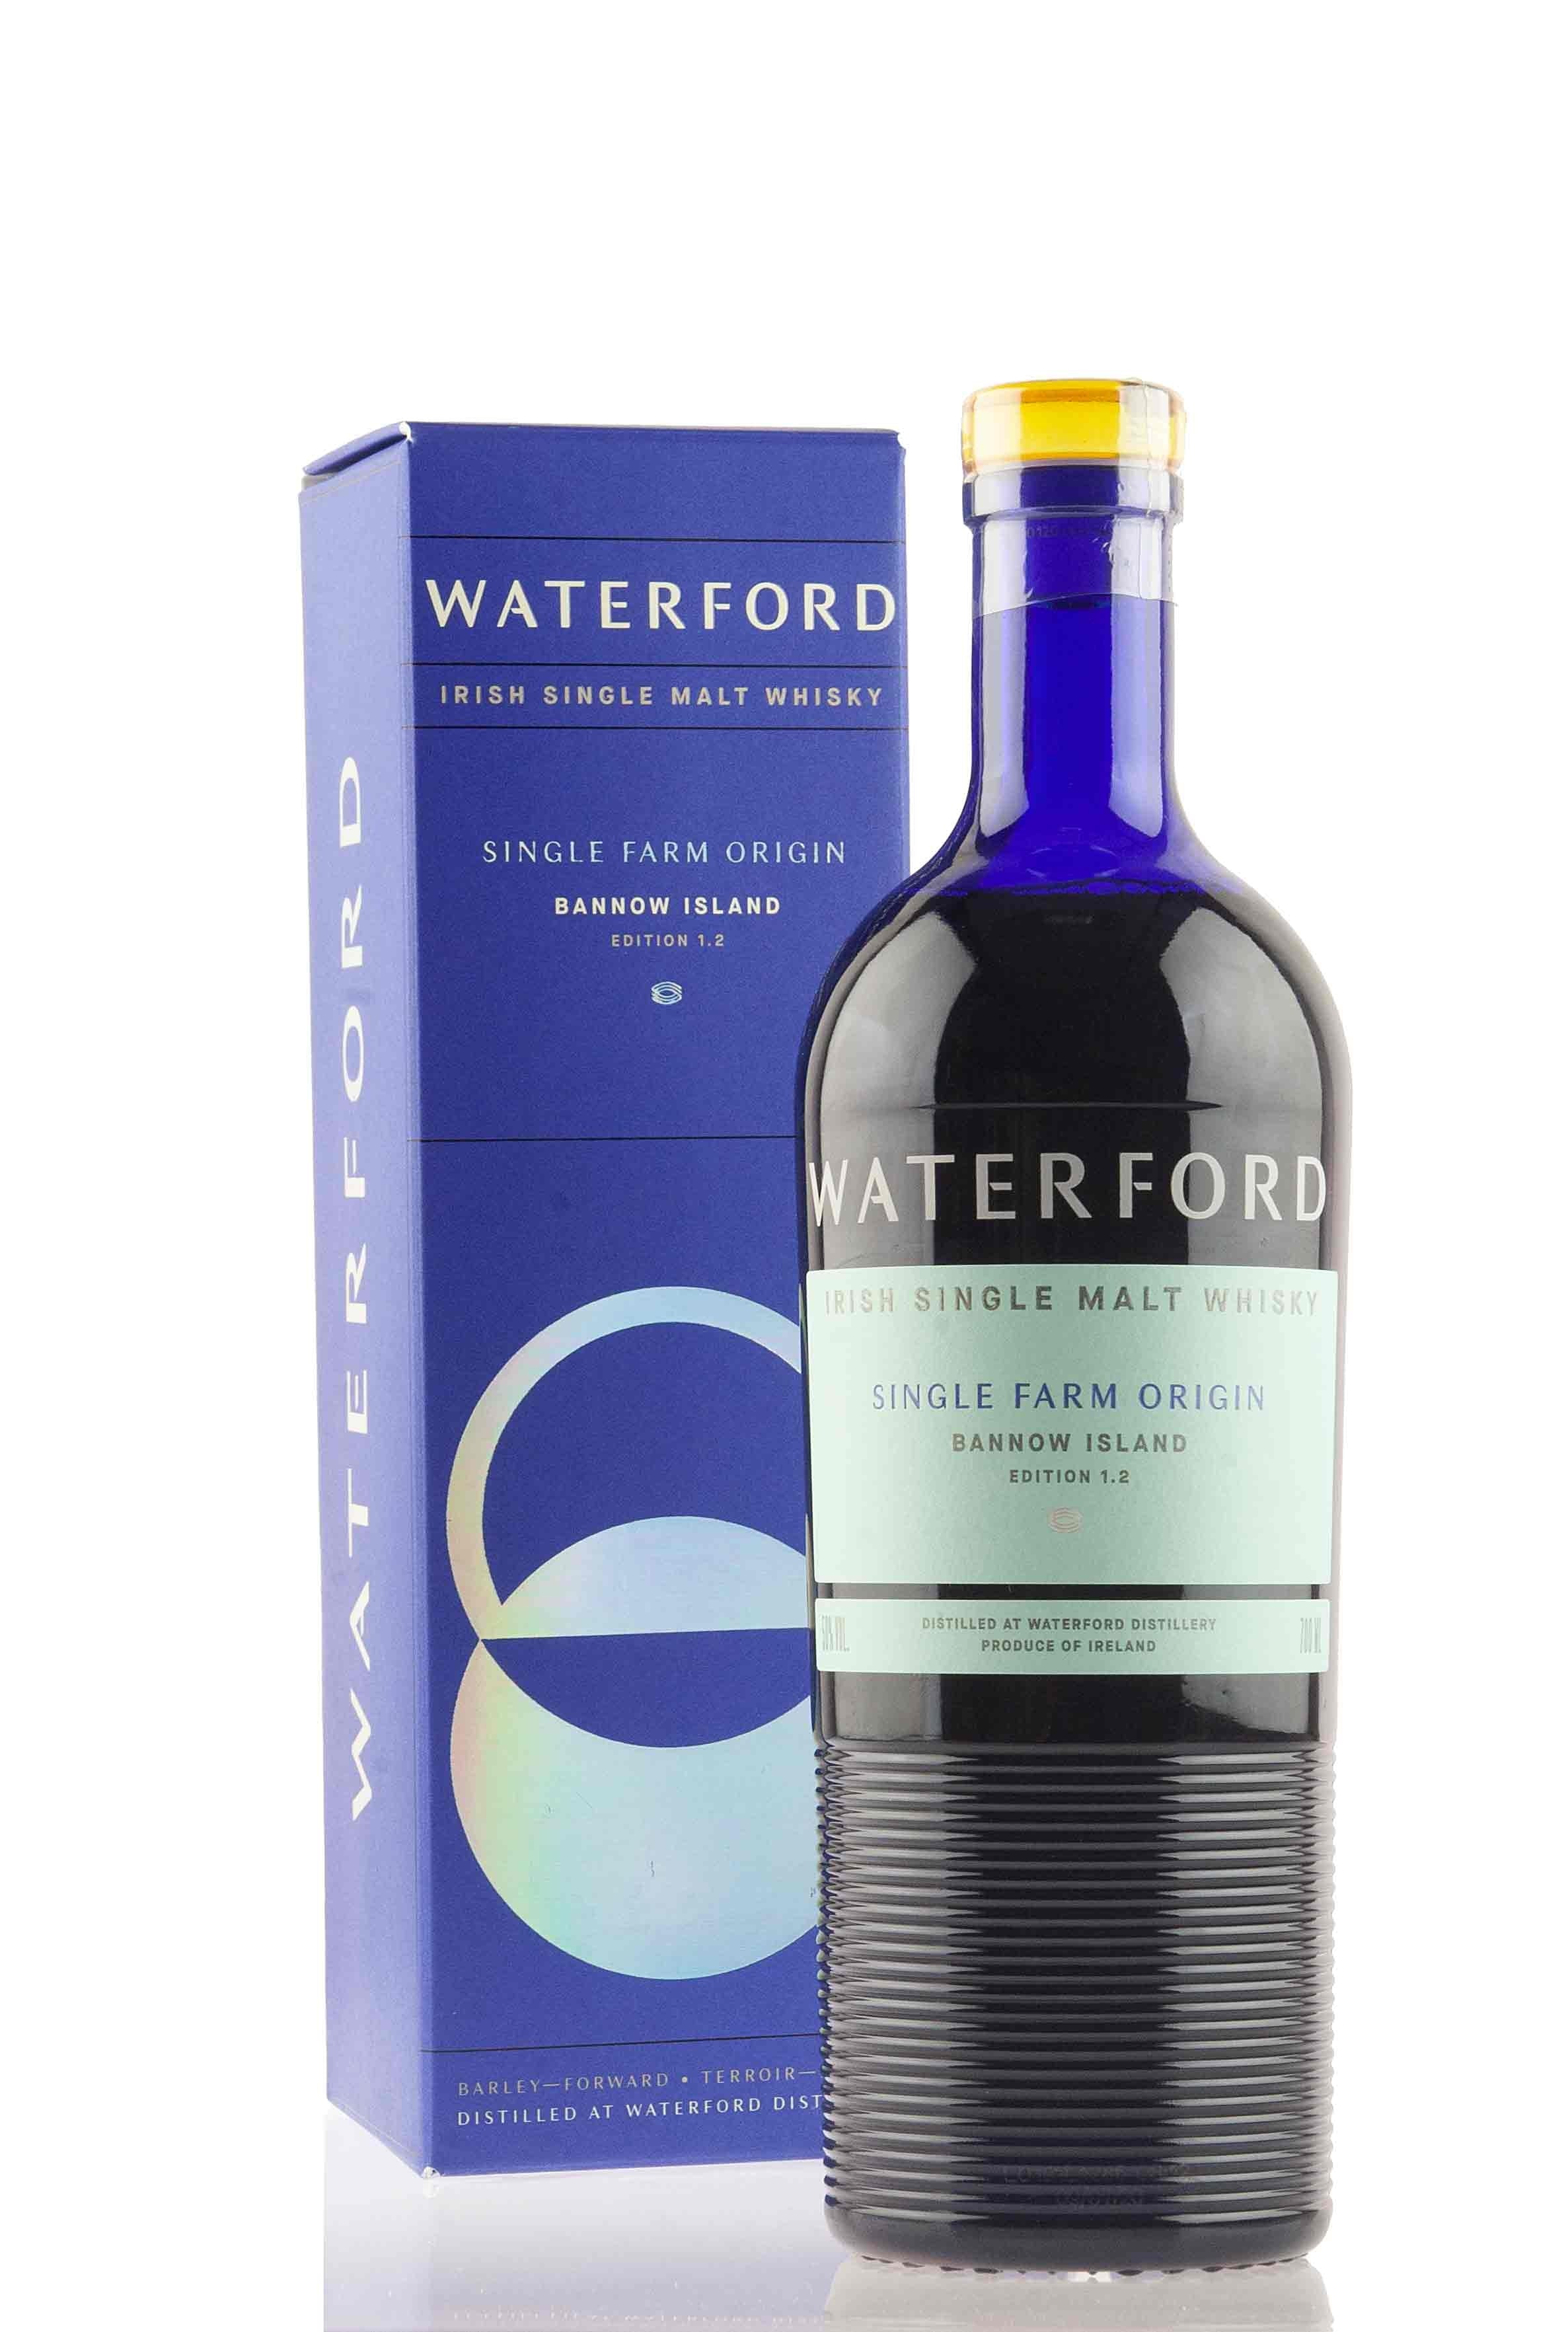 Waterford Bannow Island: Edition 1.2